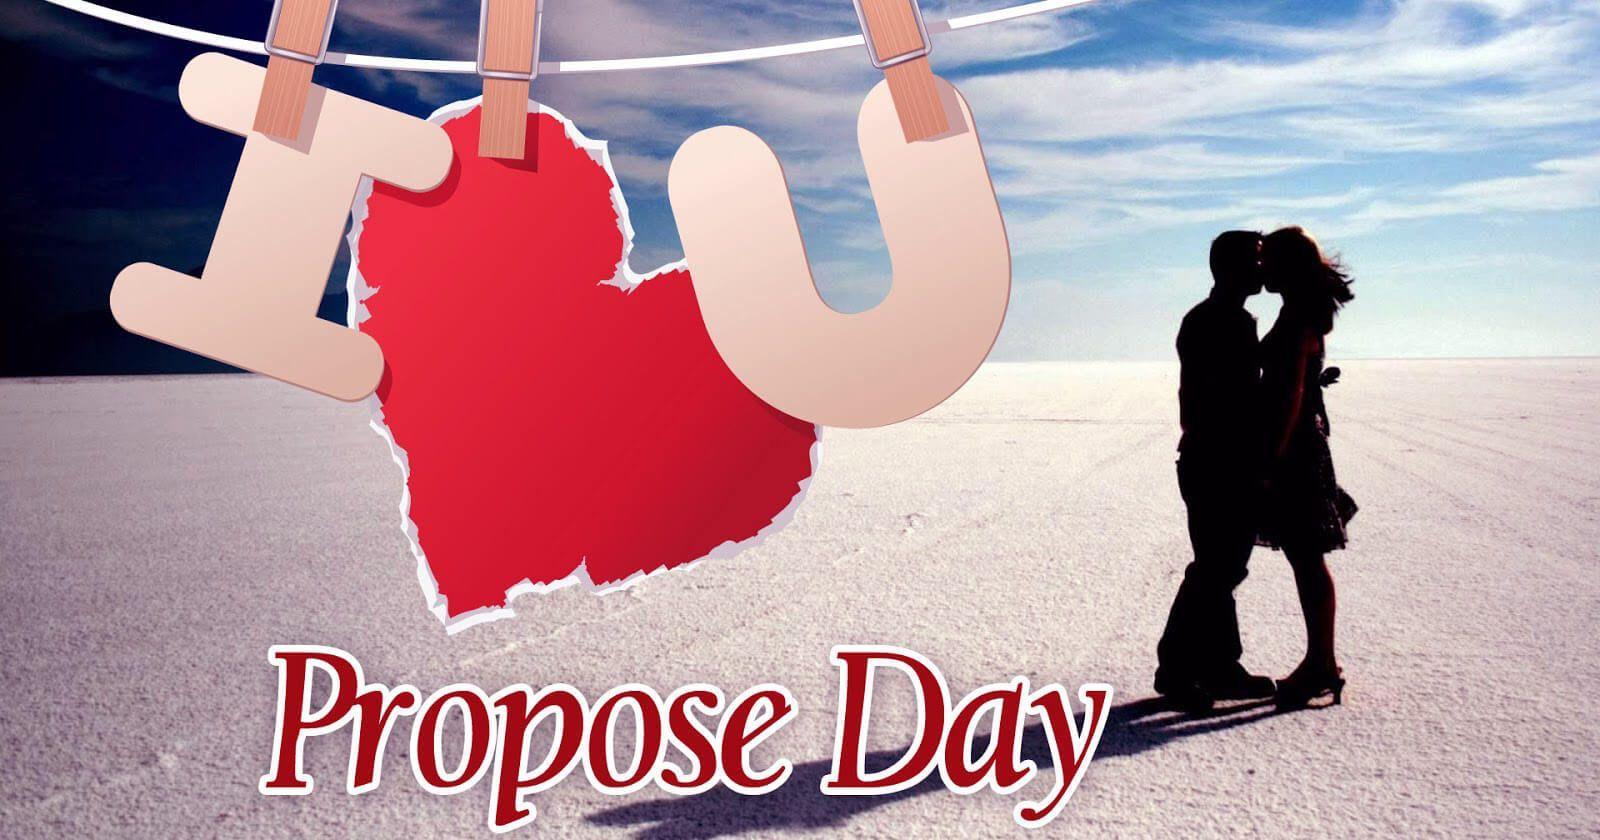 Propose Day Image 2017. Happy Propose Day SMS, Quotes 2017